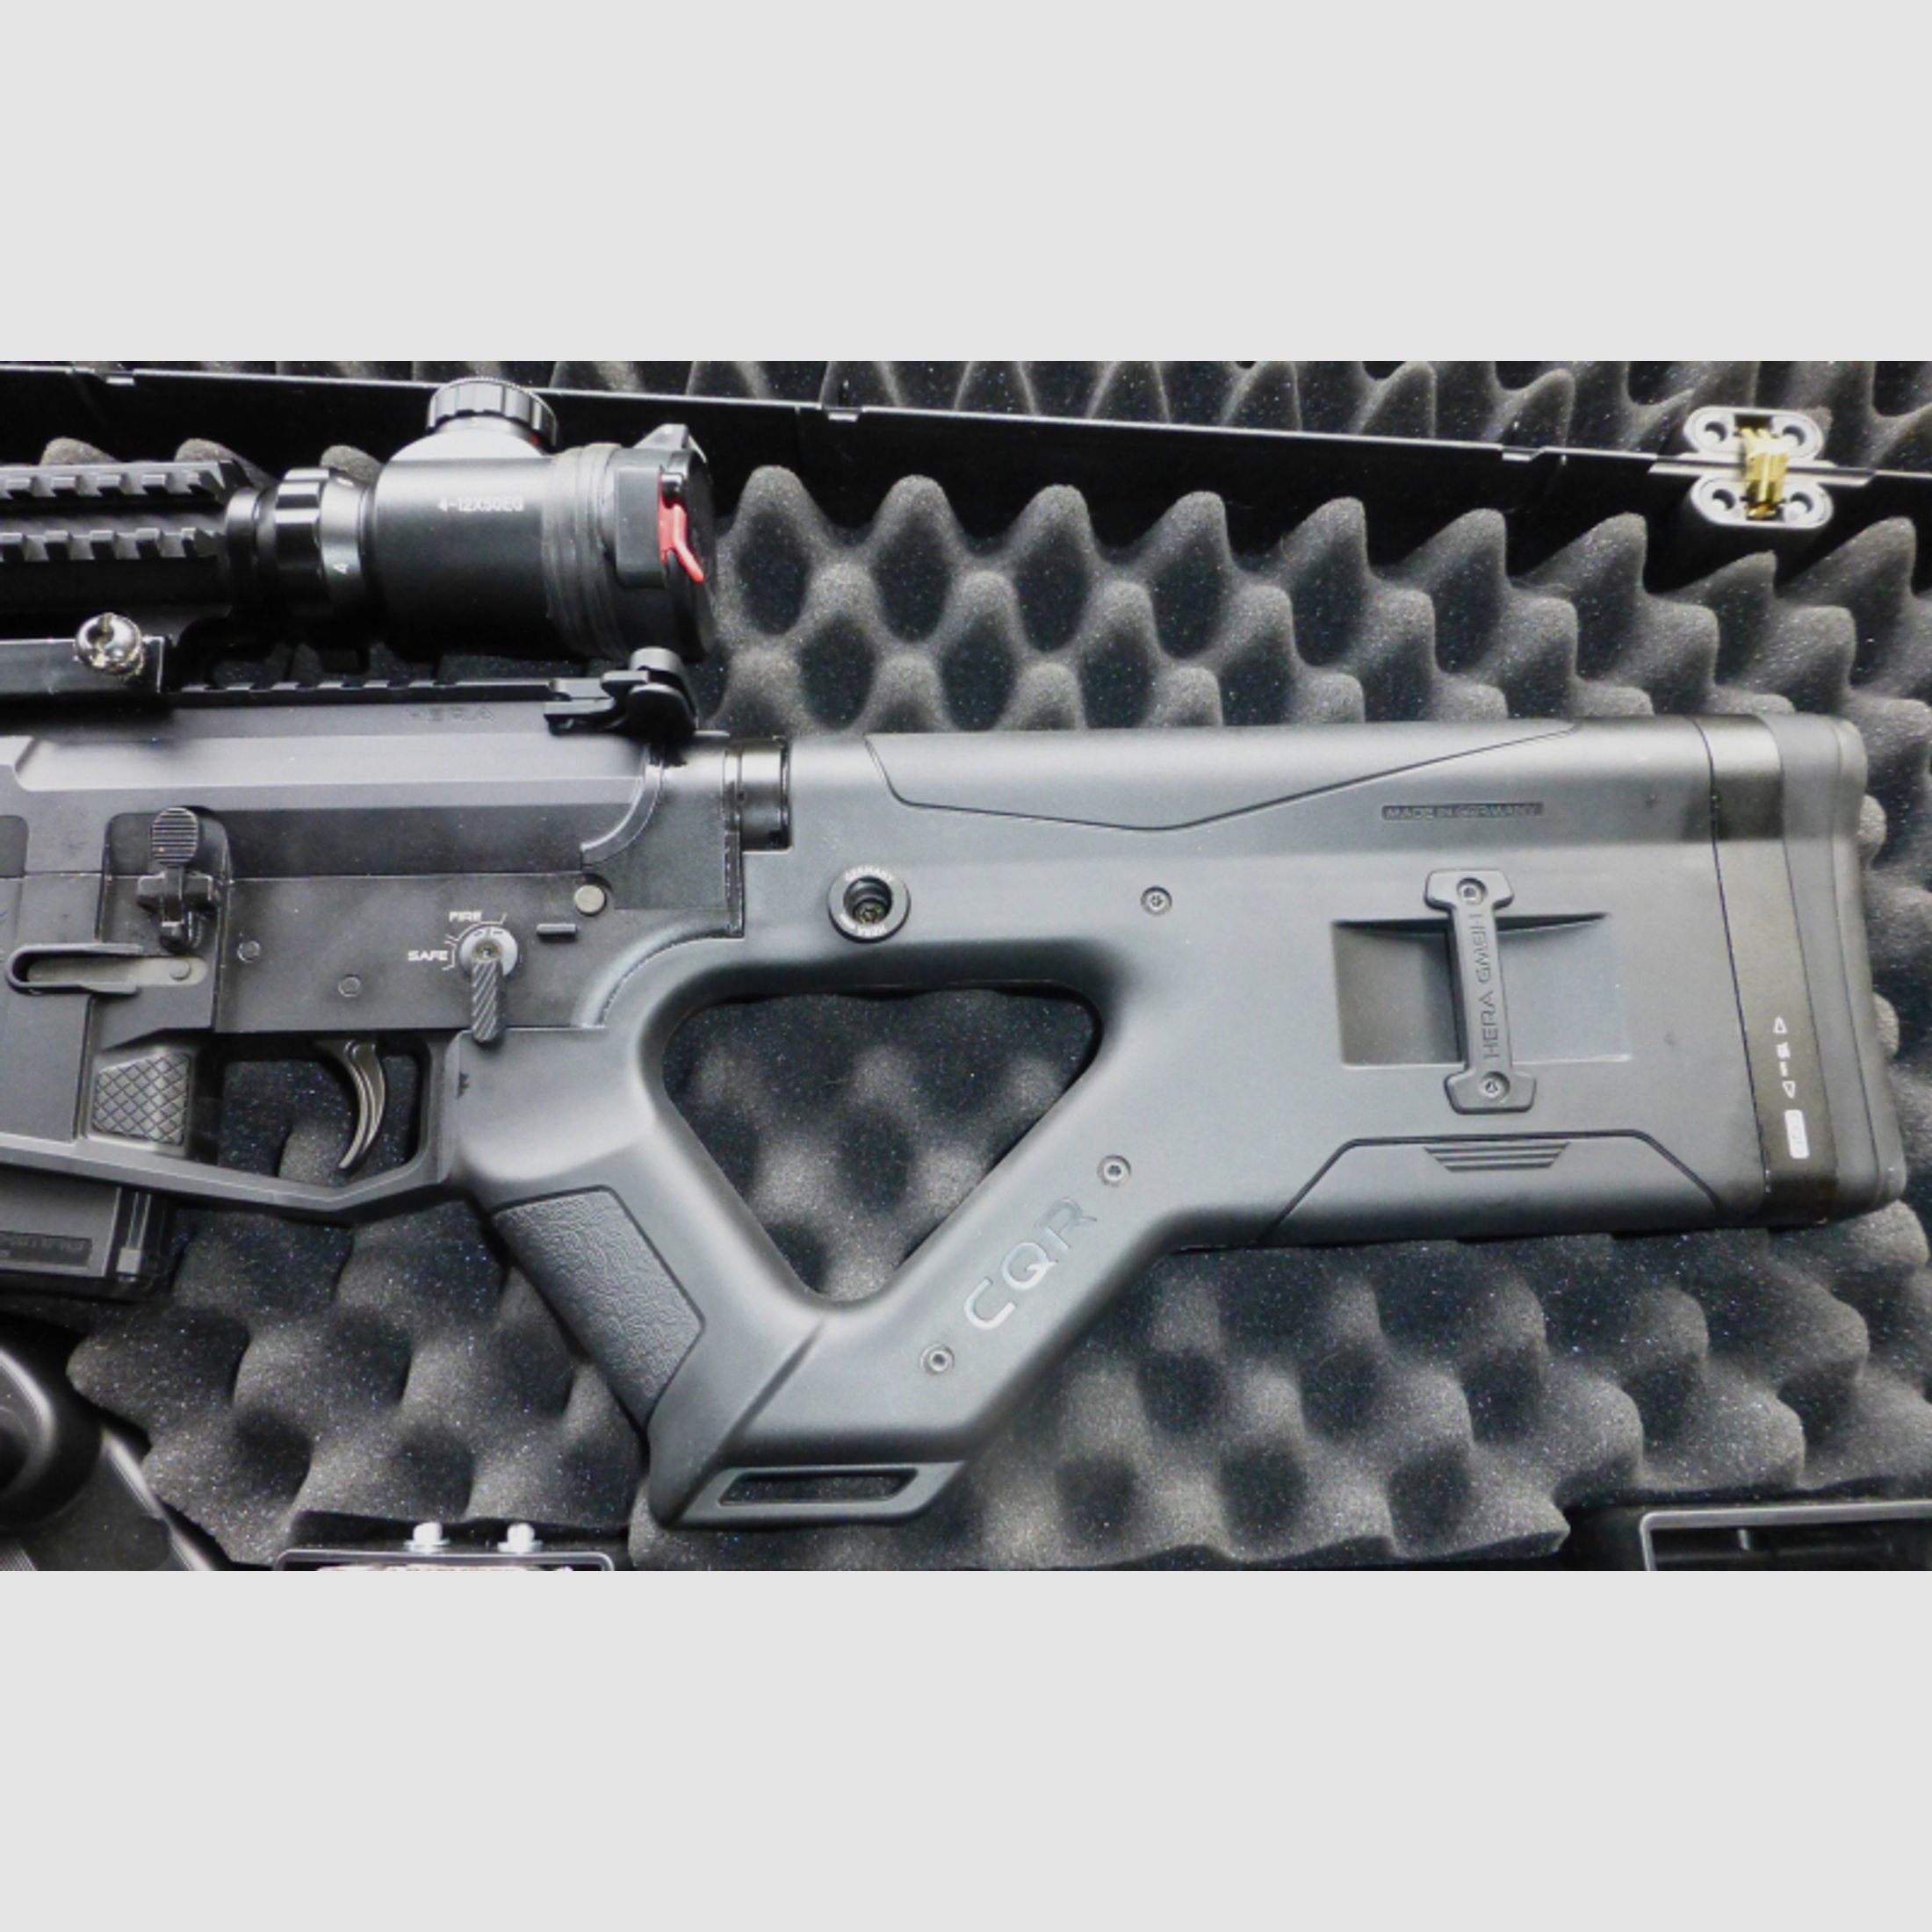 SLB Hera Arms AR15 the15TH Kal.223rem.